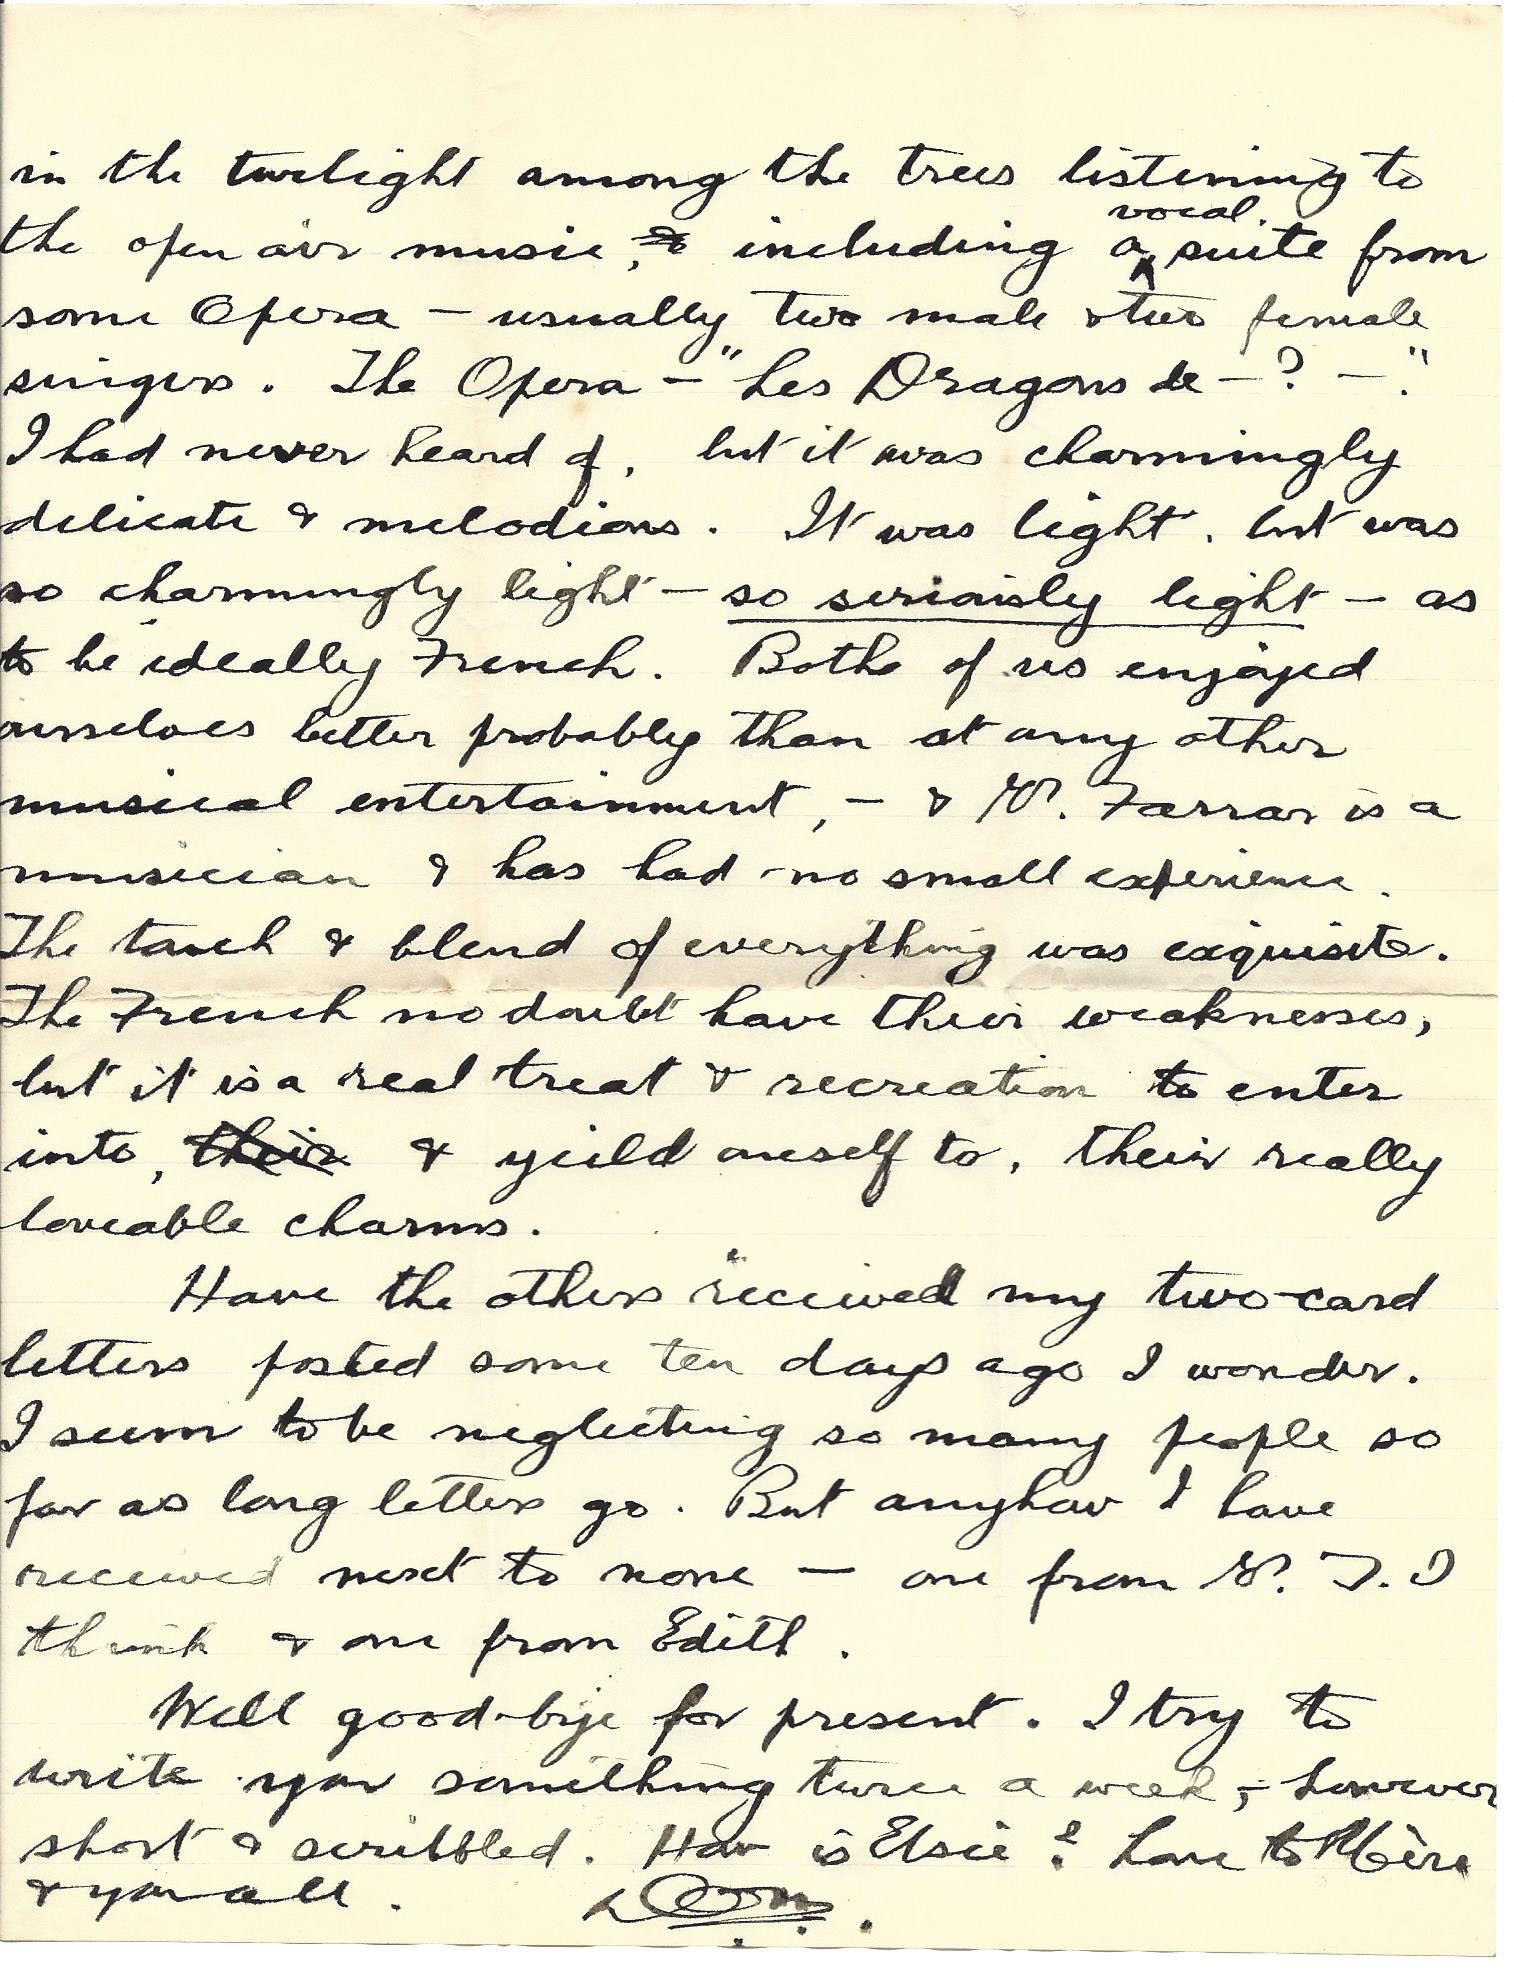 1919-07-31 Letter by Donald Boyd Bearman to his father, page 3